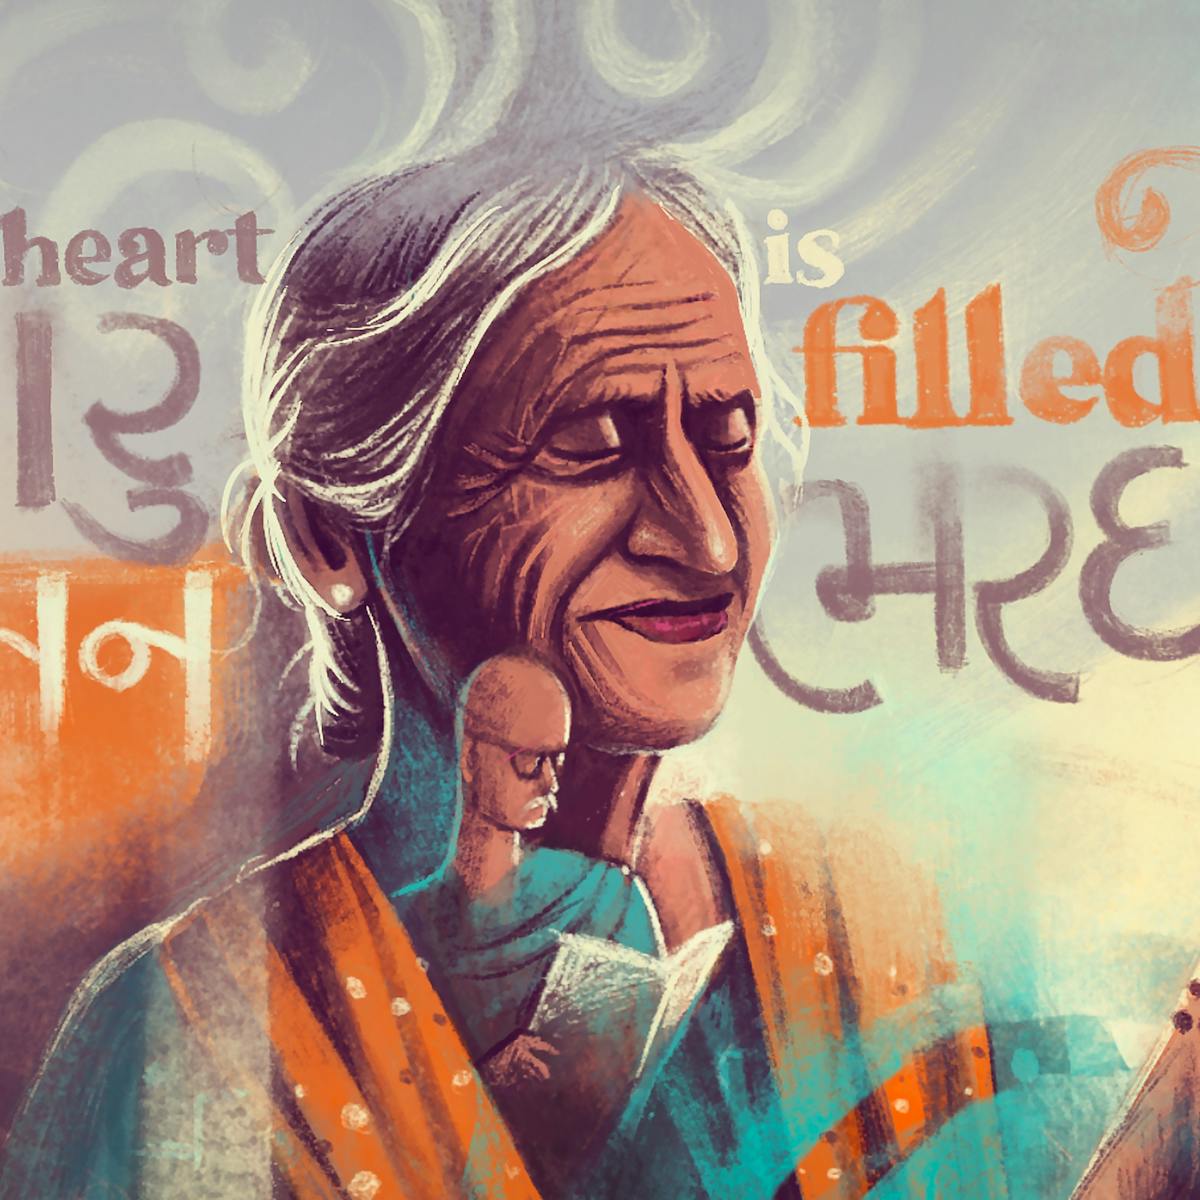 Digital artwork in the style of a pastel drawing using muted hues of blues, oranges and mauves. The drawing shows an older woman in the centre from the shoulders up. She has her eyes closed and a gentle smile on her face. Her long silver grey hair is tied behind her head. Her left hand is raised up and a beaded necklace flows through her fingers and around her wrist. She is wearing an orange shawl over her shoulders. Behind her in a swirling cloud like backdrop are words written in Gujarati with a rough English translation, 'My heart is filled'. Overlaid in an abstract way a small male figures appears on top of her neck and chest, as if appearing from her shawl. The small figure is wearing glasses and has a white moustache. He is holding a large book or newspaper in his hands, which he is reading.